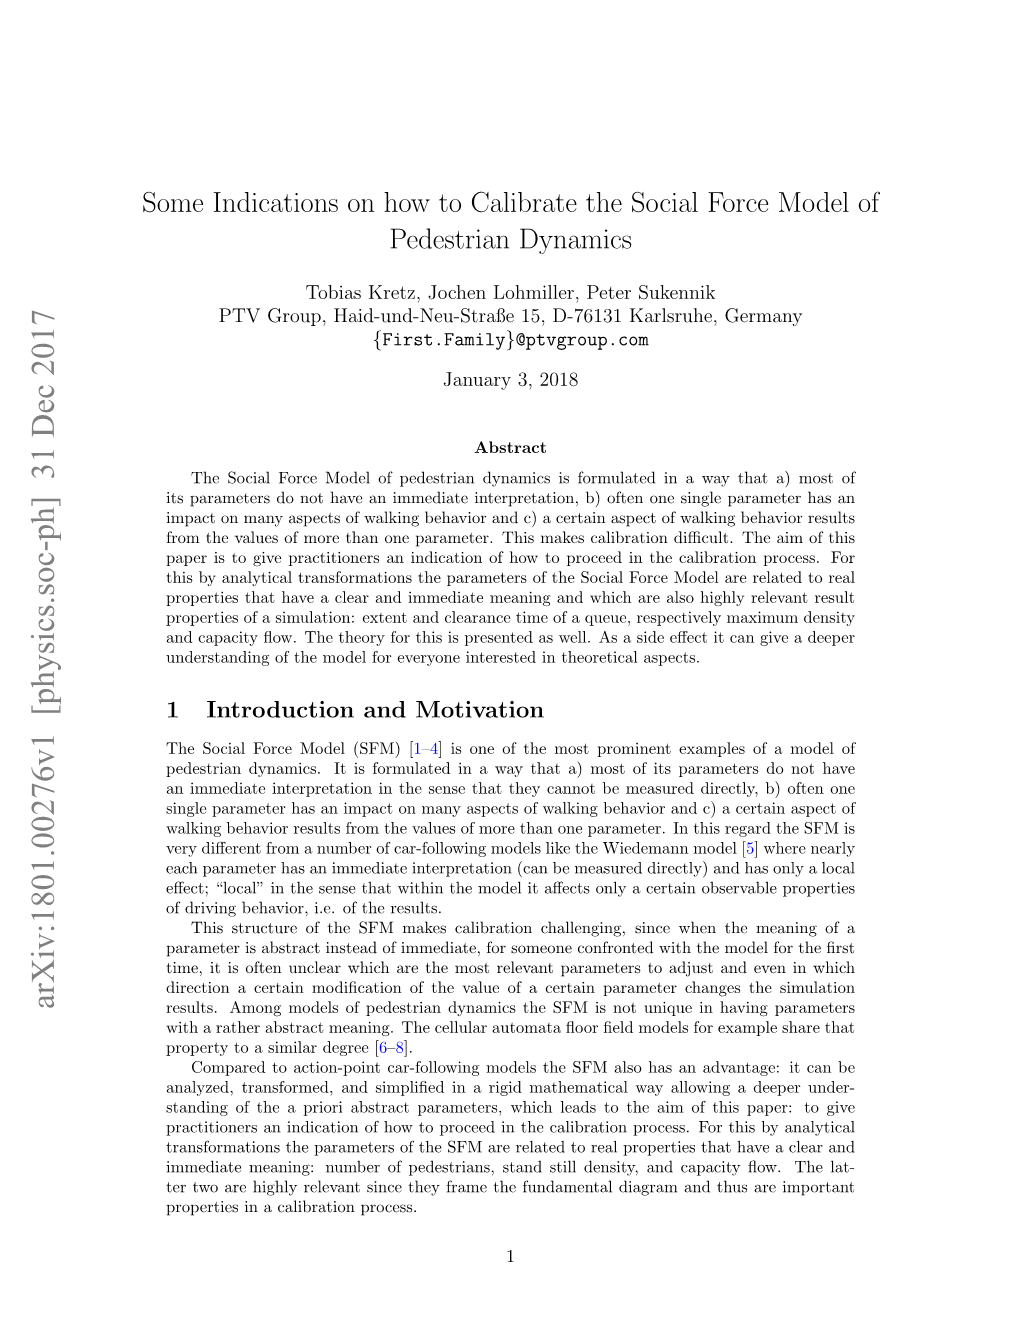 Some Indications on How to Calibrate the Social Force Model of Pedestrian Dynamics